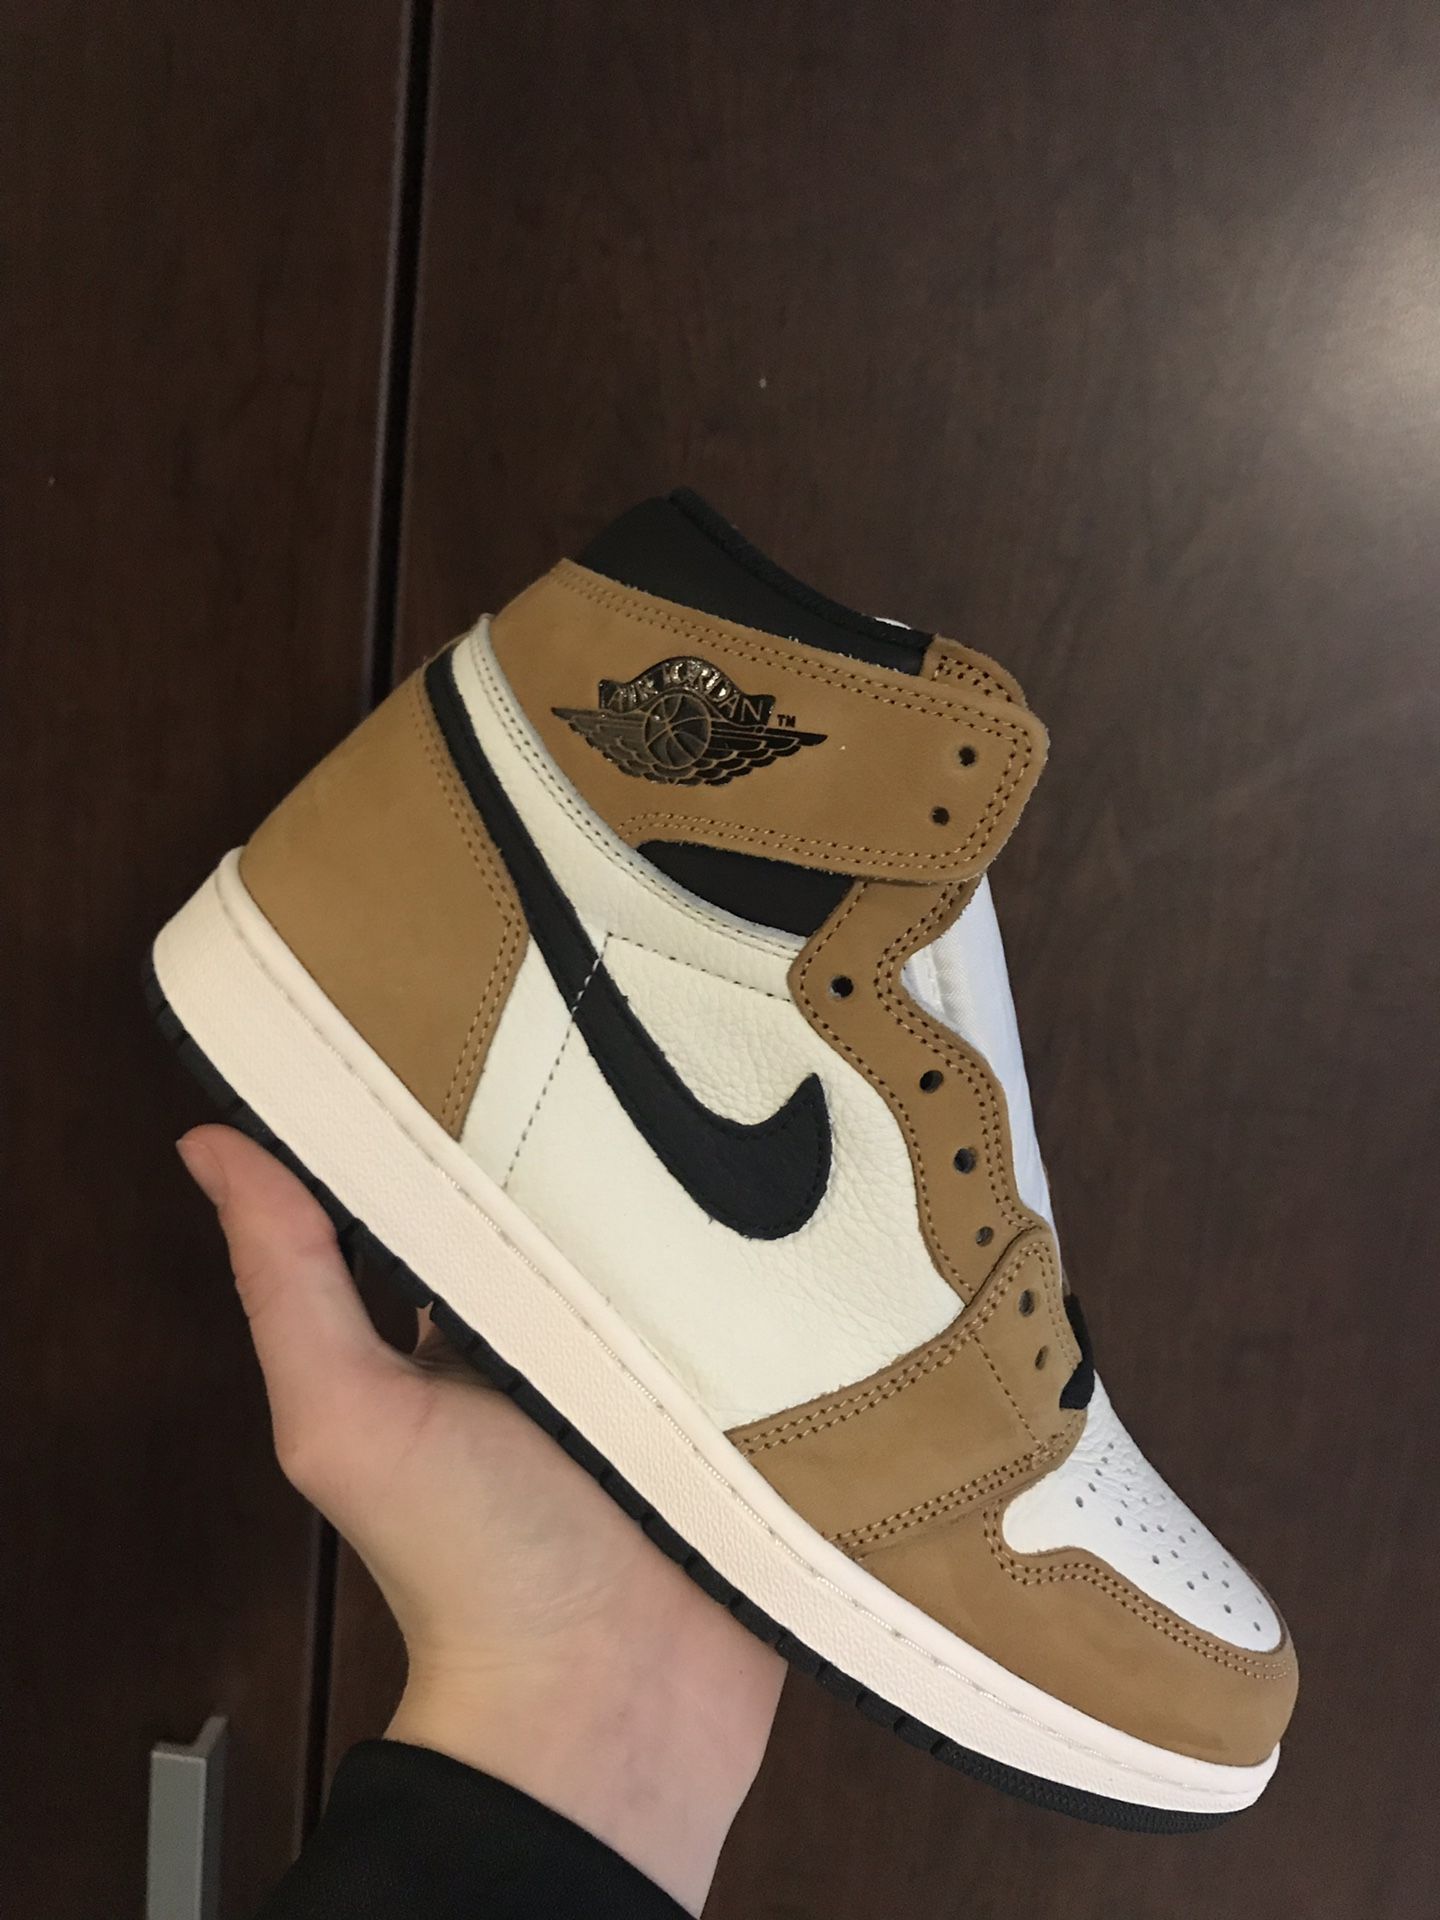 Rookie of the Year Jordan 1 size 9